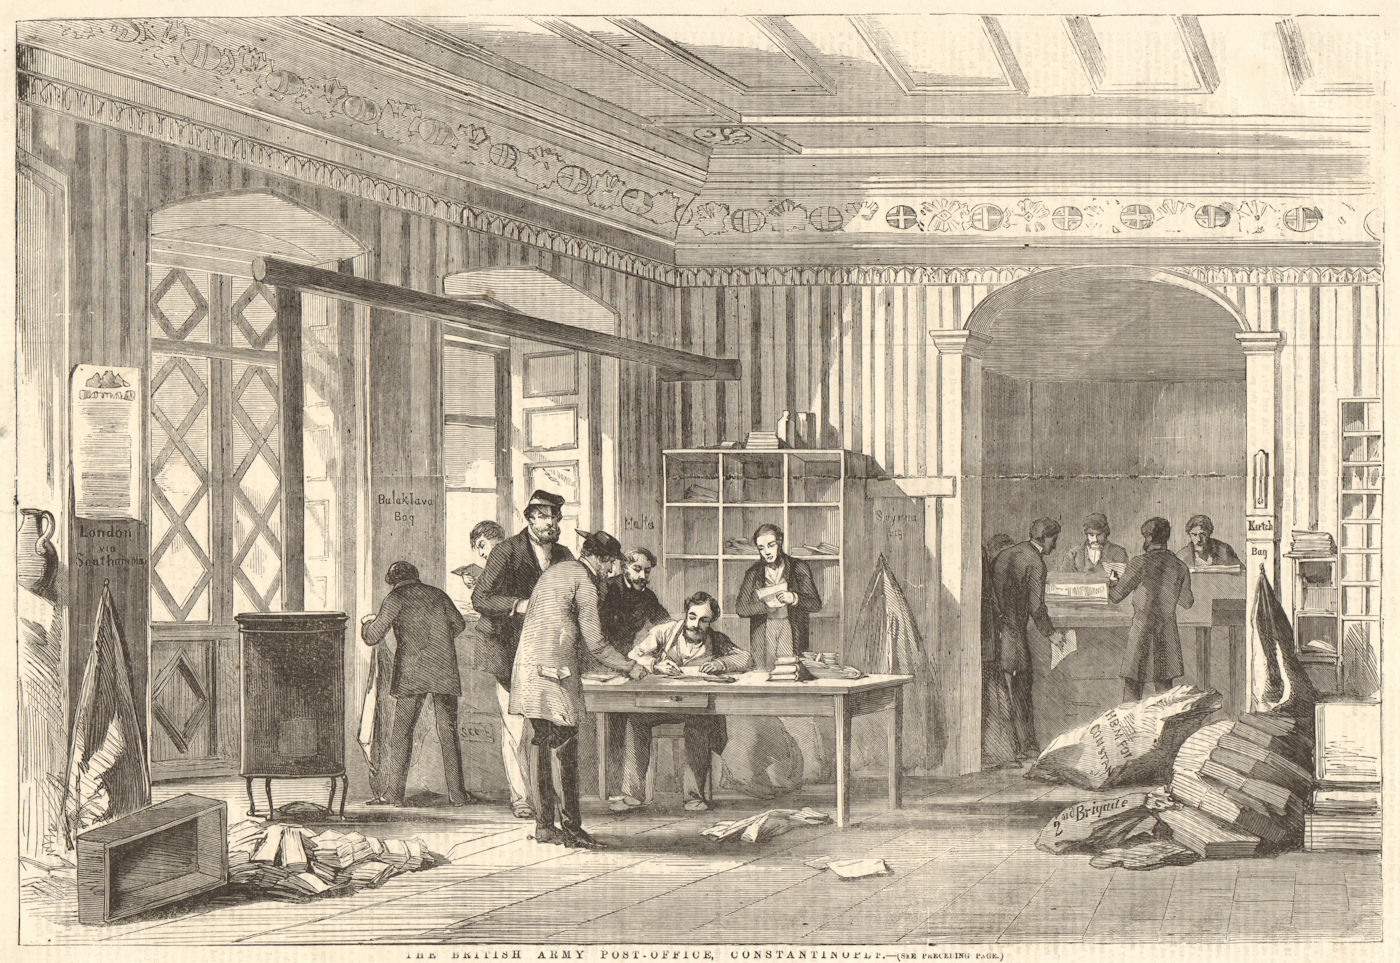 Associate Product The British Army post-office, Constantinople (Istanbul) . Turkey 1856